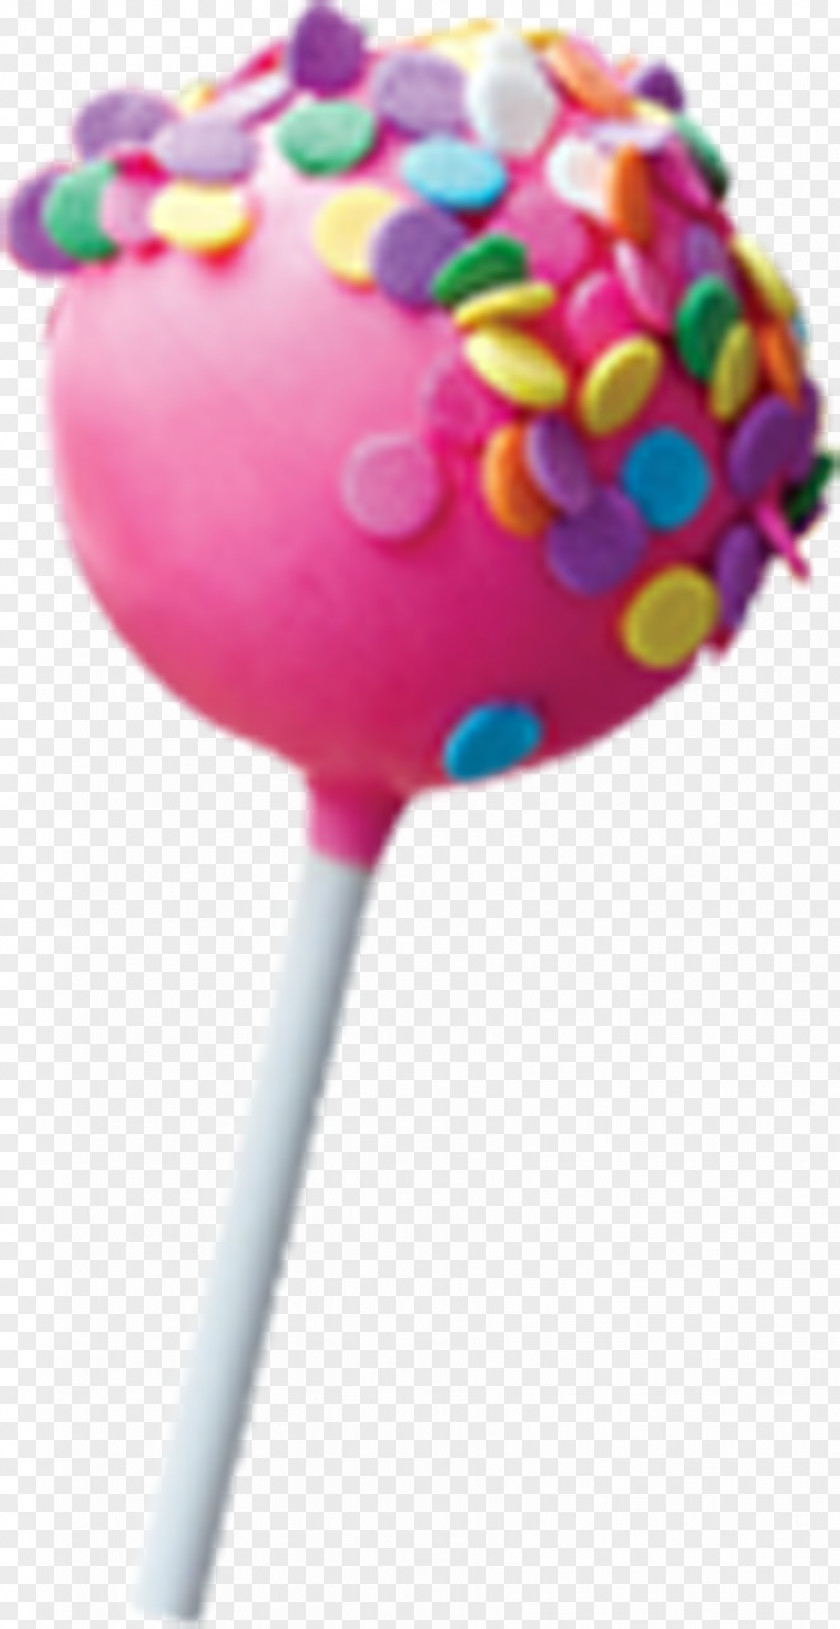 Pink Lollipop Ice Cream Candy Doughnut Confectionery PNG